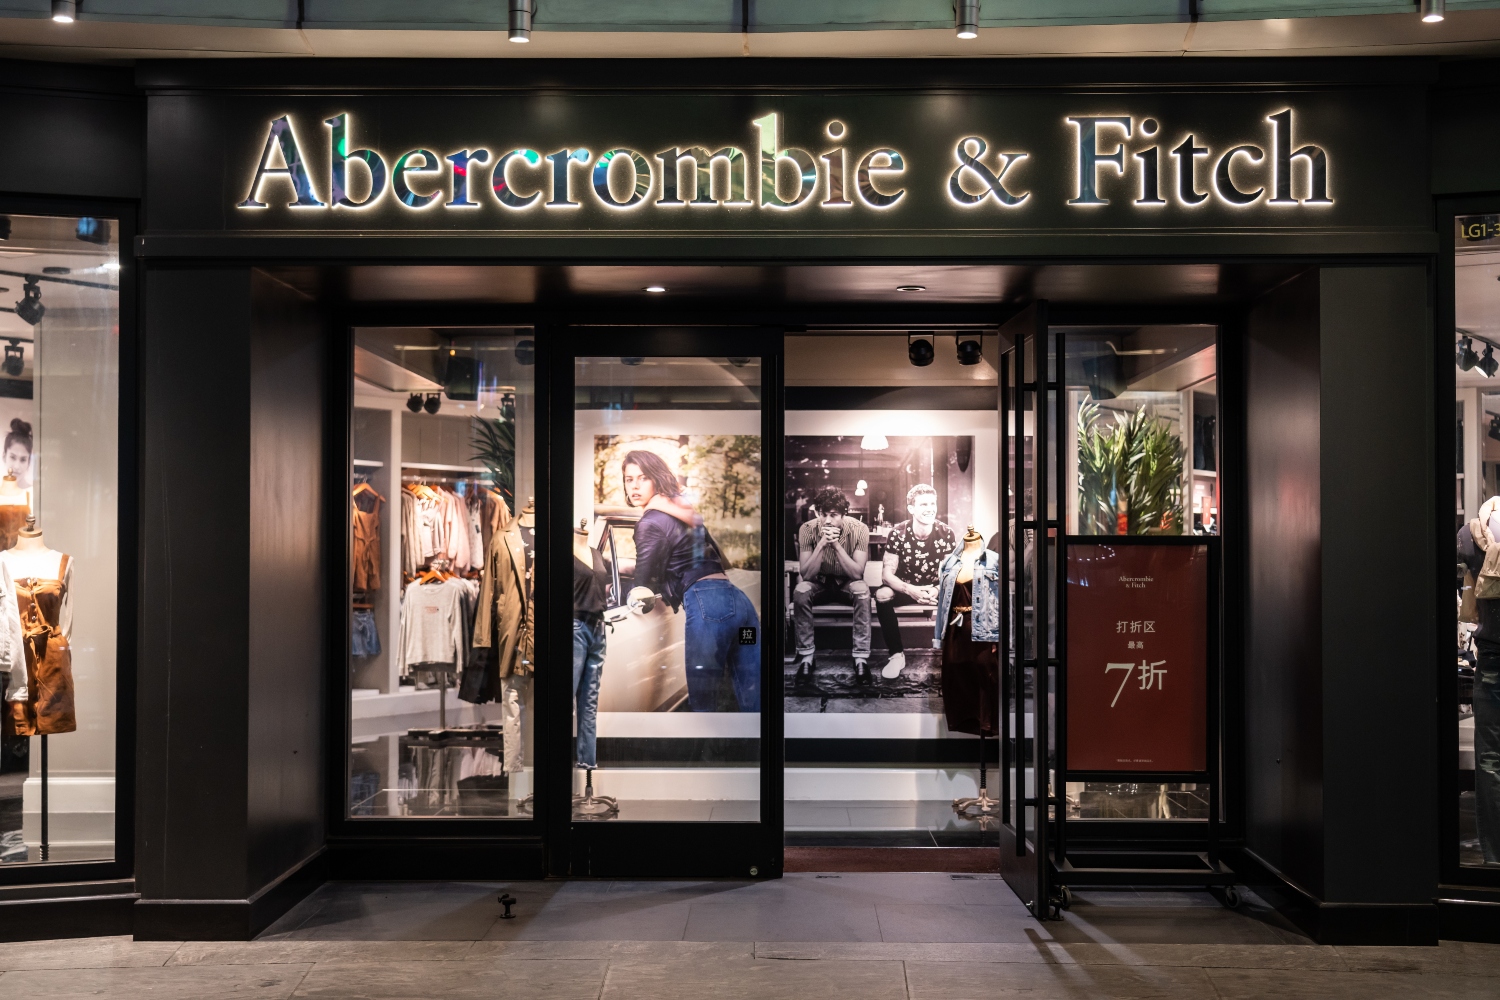 American lifestyle retailer Abercrombie & Fitch store and logo seen in Shanghai.